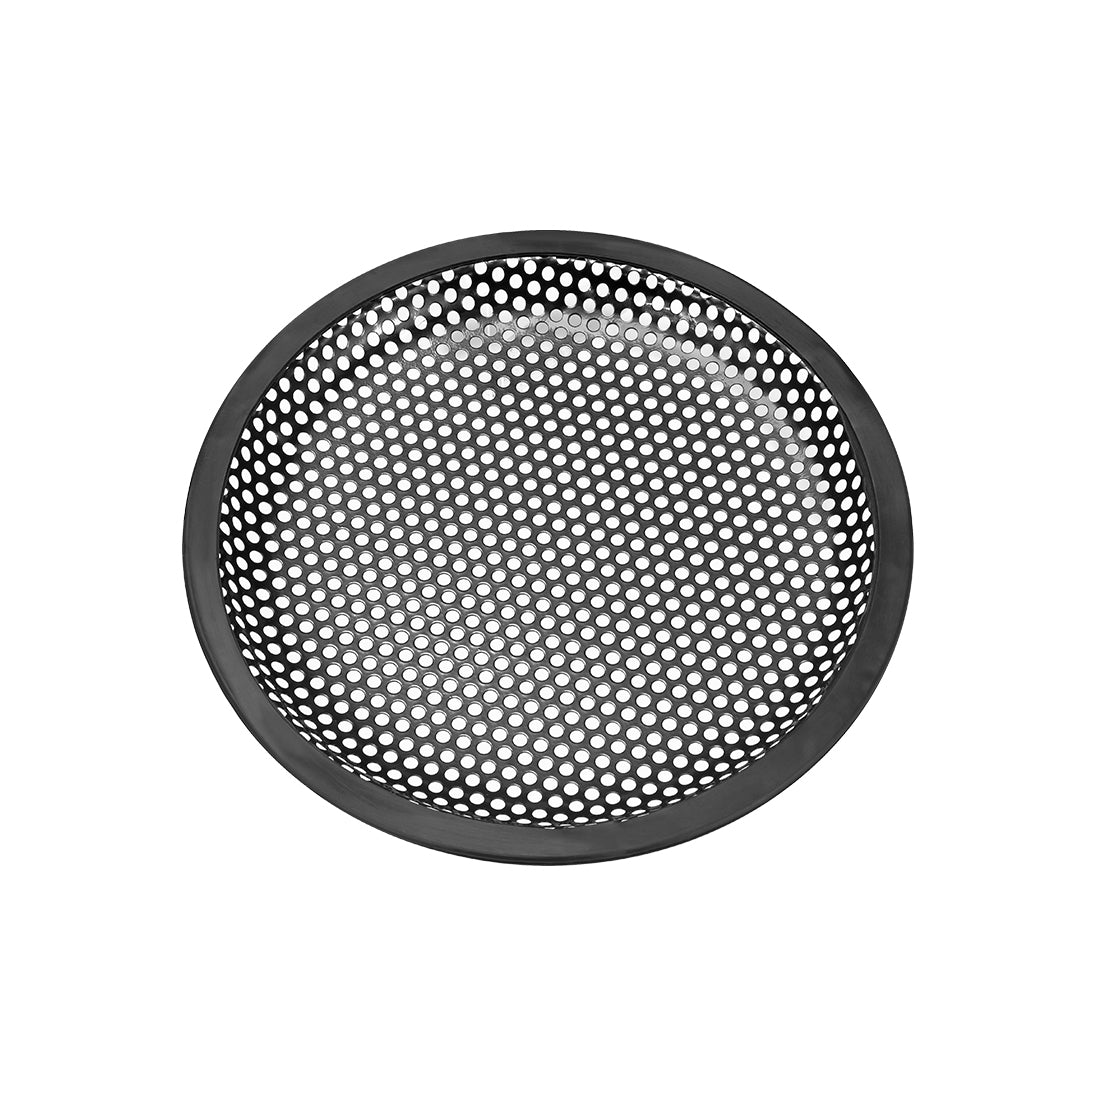 uxcell Uxcell 6.5" Speaker Waffle Grill Metal Mesh Audio Subwoofer Guard Protector Cover with Clips,Screws